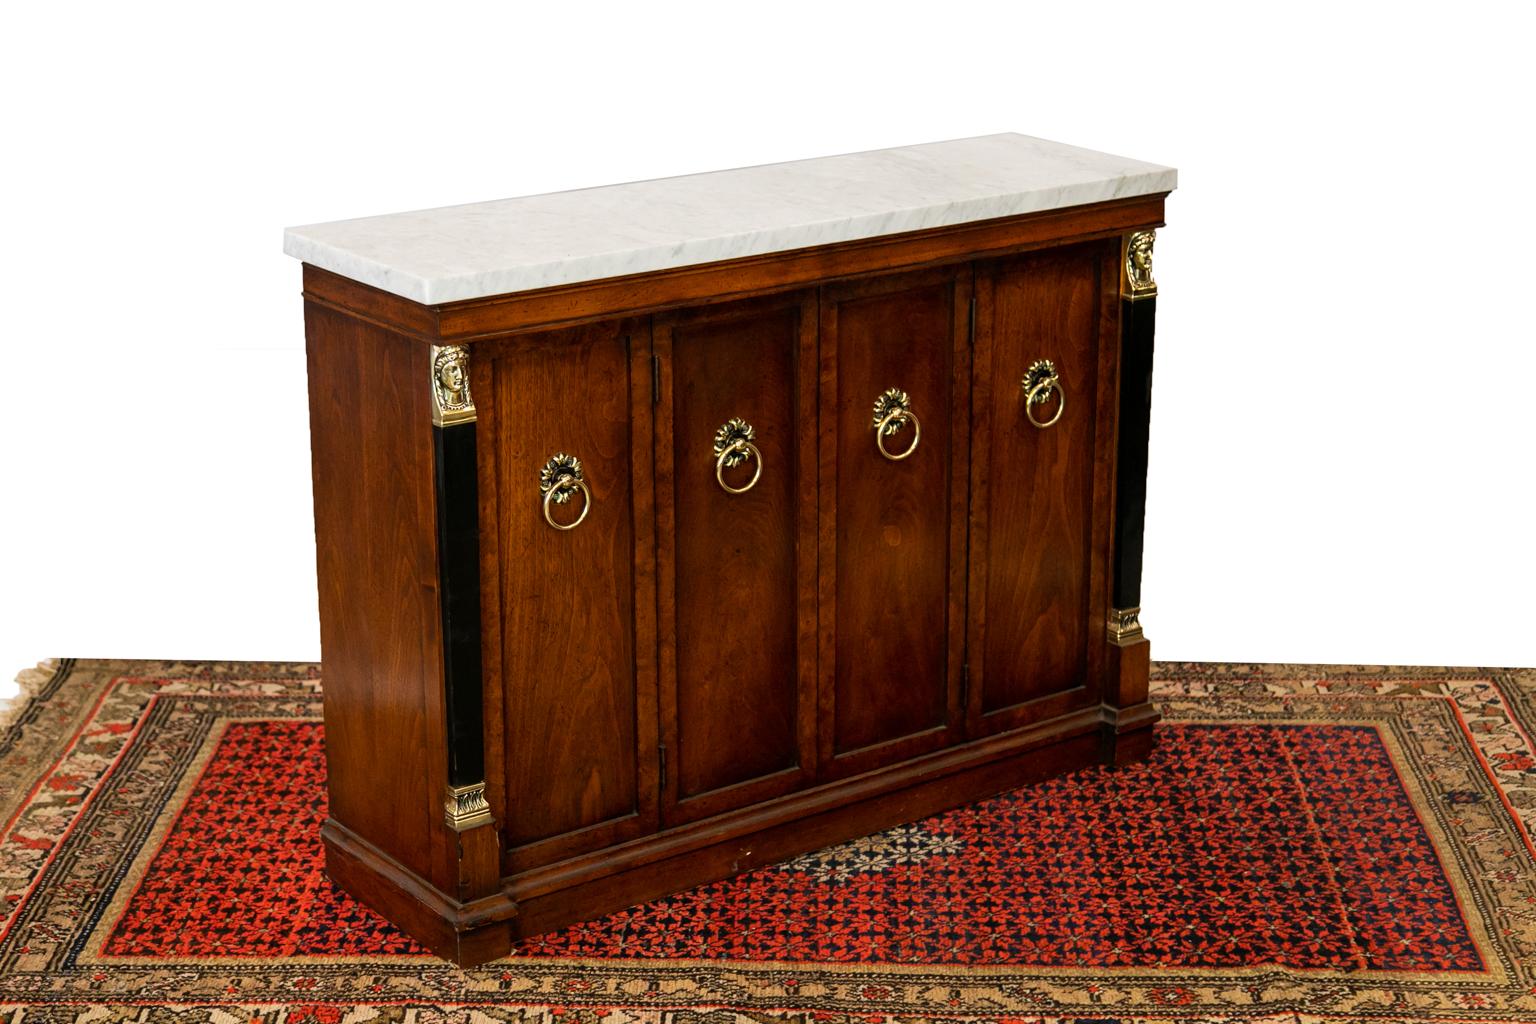 This Regency style server has a white Carrera marble top. The brasses are original and are polished and lacquered for ease of maintenance. The two center doors open to expose the interior cabinet which has one adjustable shelf.